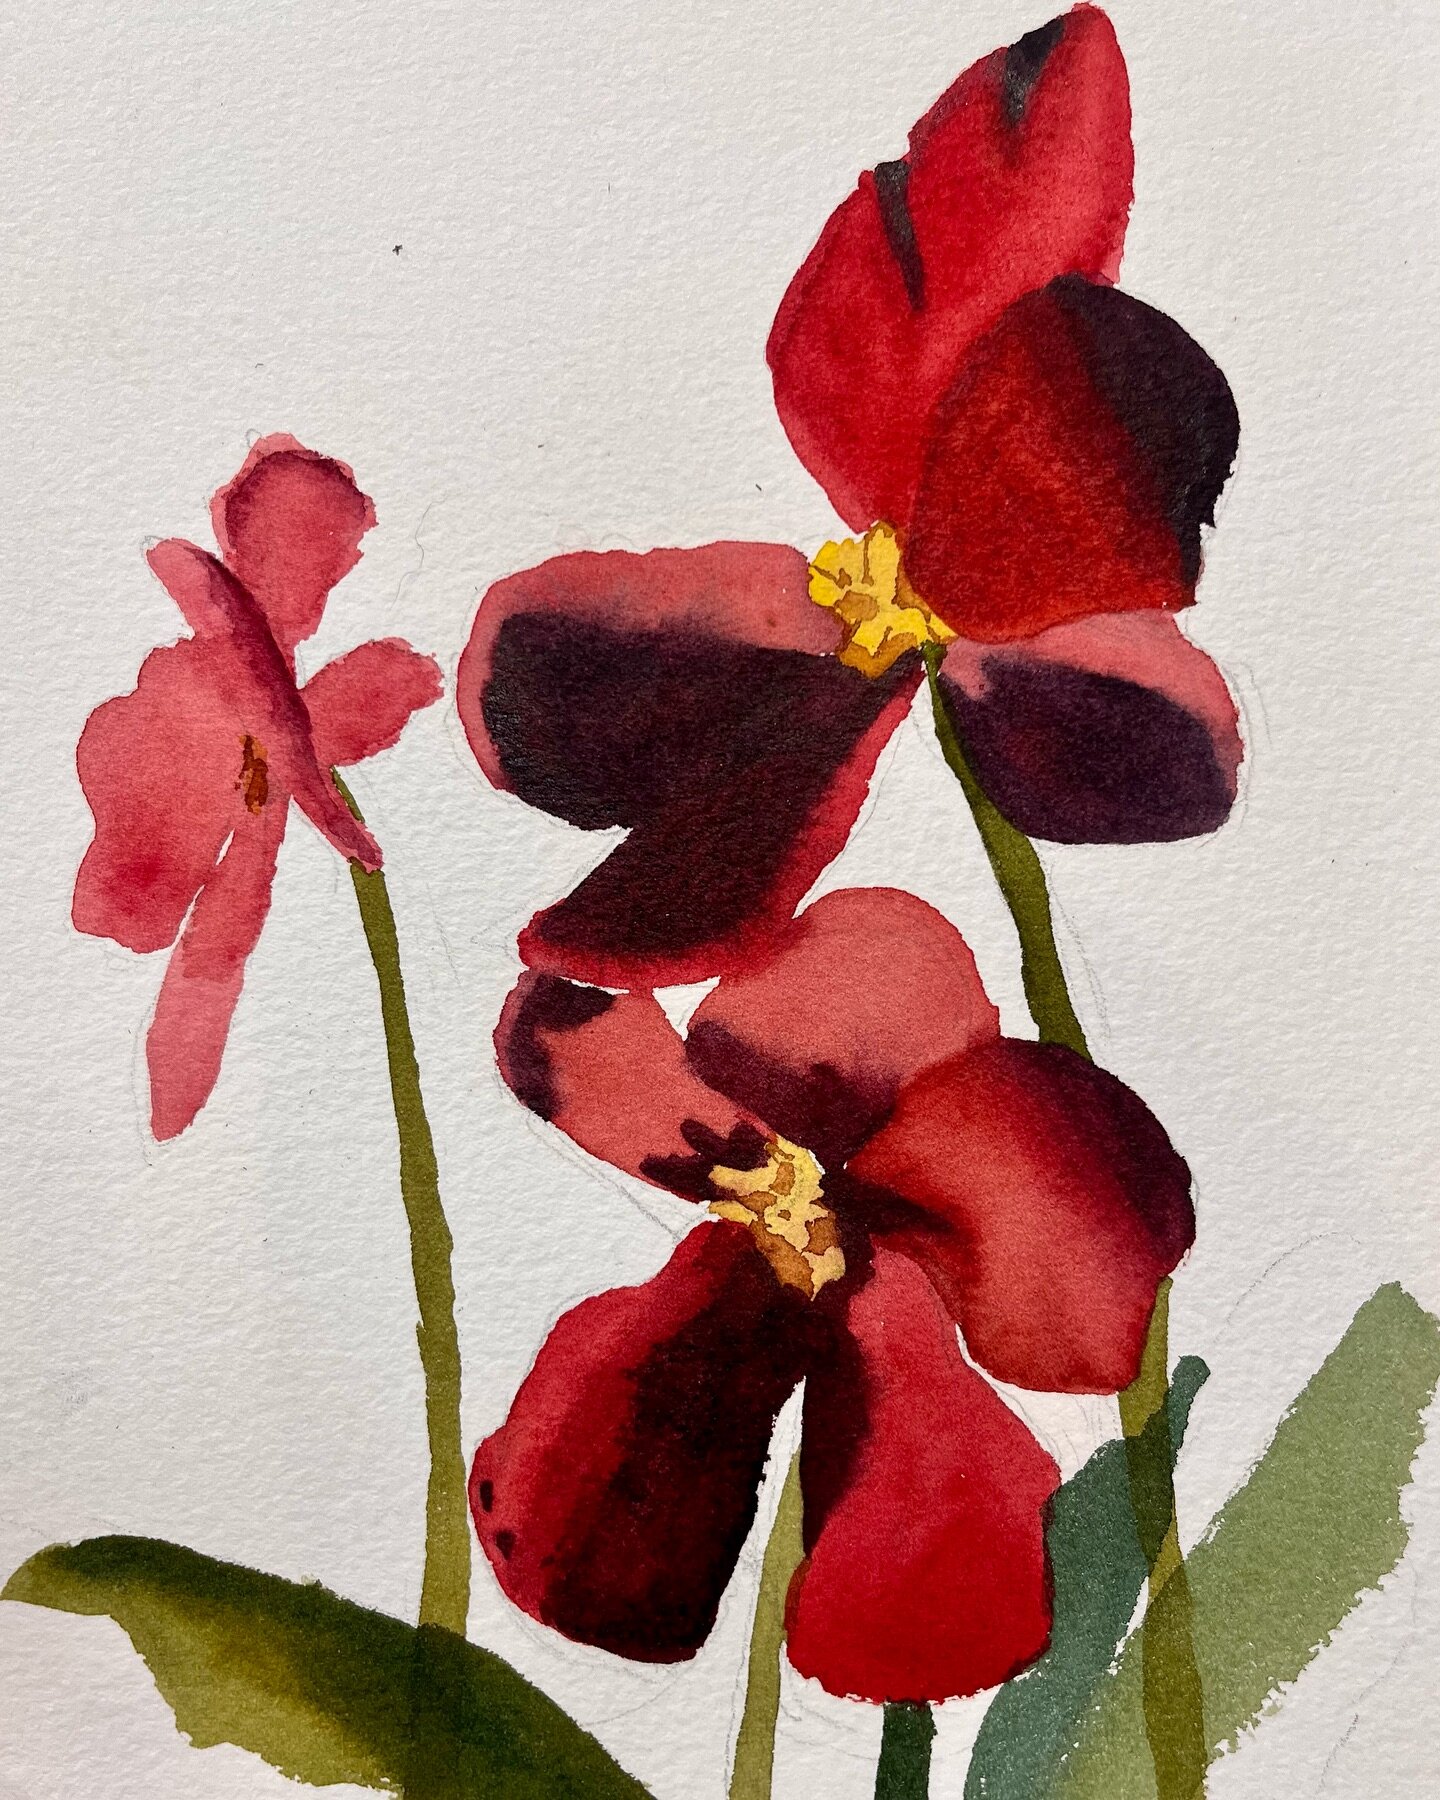 Small watercolour study currently on display at @mintarthouse as part of the Papercuts exhibition on display for the next two weeks and available for purchase 

watercolour on watercolour paper 
17x25cm 
$90